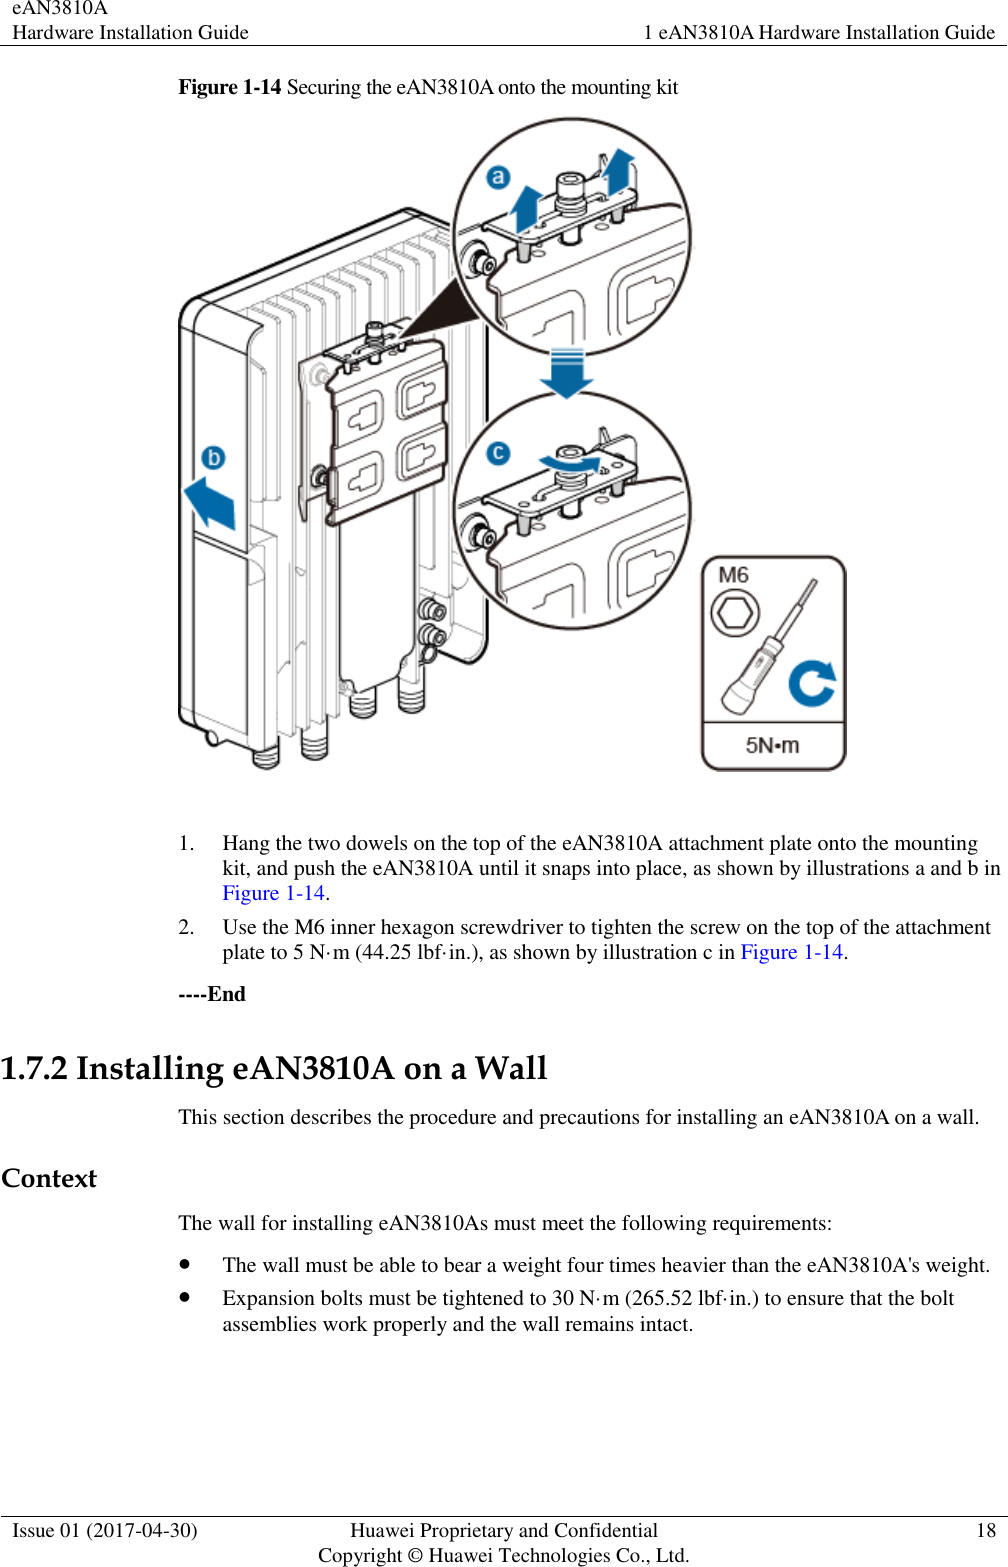 eAN3810A   Hardware Installation Guide 1 eAN3810A Hardware Installation Guide  Issue 01 (2017-04-30) Huawei Proprietary and Confidential                                     Copyright © Huawei Technologies Co., Ltd. 18  Figure 1-14 Securing the eAN3810A onto the mounting kit   1. Hang the two dowels on the top of the eAN3810A attachment plate onto the mounting kit, and push the eAN3810A until it snaps into place, as shown by illustrations a and b in Figure 1-14. 2. Use the M6 inner hexagon screwdriver to tighten the screw on the top of the attachment plate to 5 N·m (44.25 lbf·in.), as shown by illustration c in Figure 1-14. ----End 1.7.2 Installing eAN3810A on a Wall This section describes the procedure and precautions for installing an eAN3810A on a wall. Context The wall for installing eAN3810As must meet the following requirements:  The wall must be able to bear a weight four times heavier than the eAN3810A&apos;s weight.  Expansion bolts must be tightened to 30 N·m (265.52 lbf·in.) to ensure that the bolt assemblies work properly and the wall remains intact.  